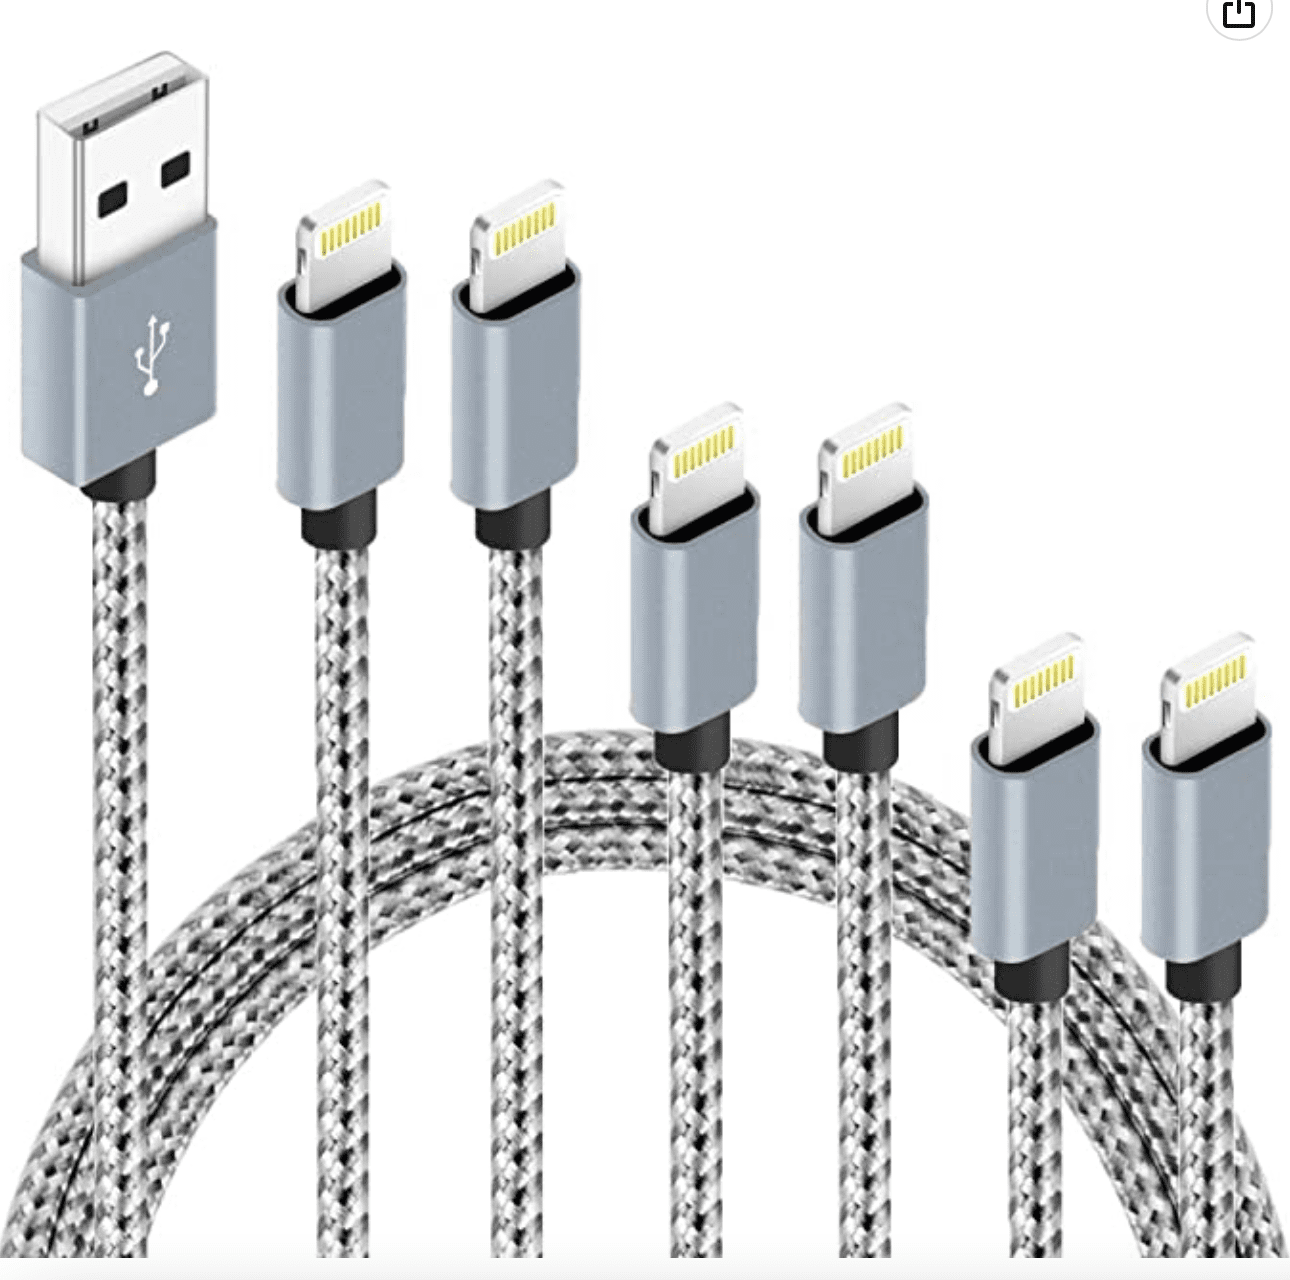 Lightning Cable,NANMING Charger Cables 4Pack 3FT 6FT 6FT 10FT to USB Syncing Data and Nylon Braided Cord Charger for iPhone X/8/8 Plus/7/7 Plus/6/6 Plus/6s/6s Plus/5/5s/5c/SE and More Gray+White 